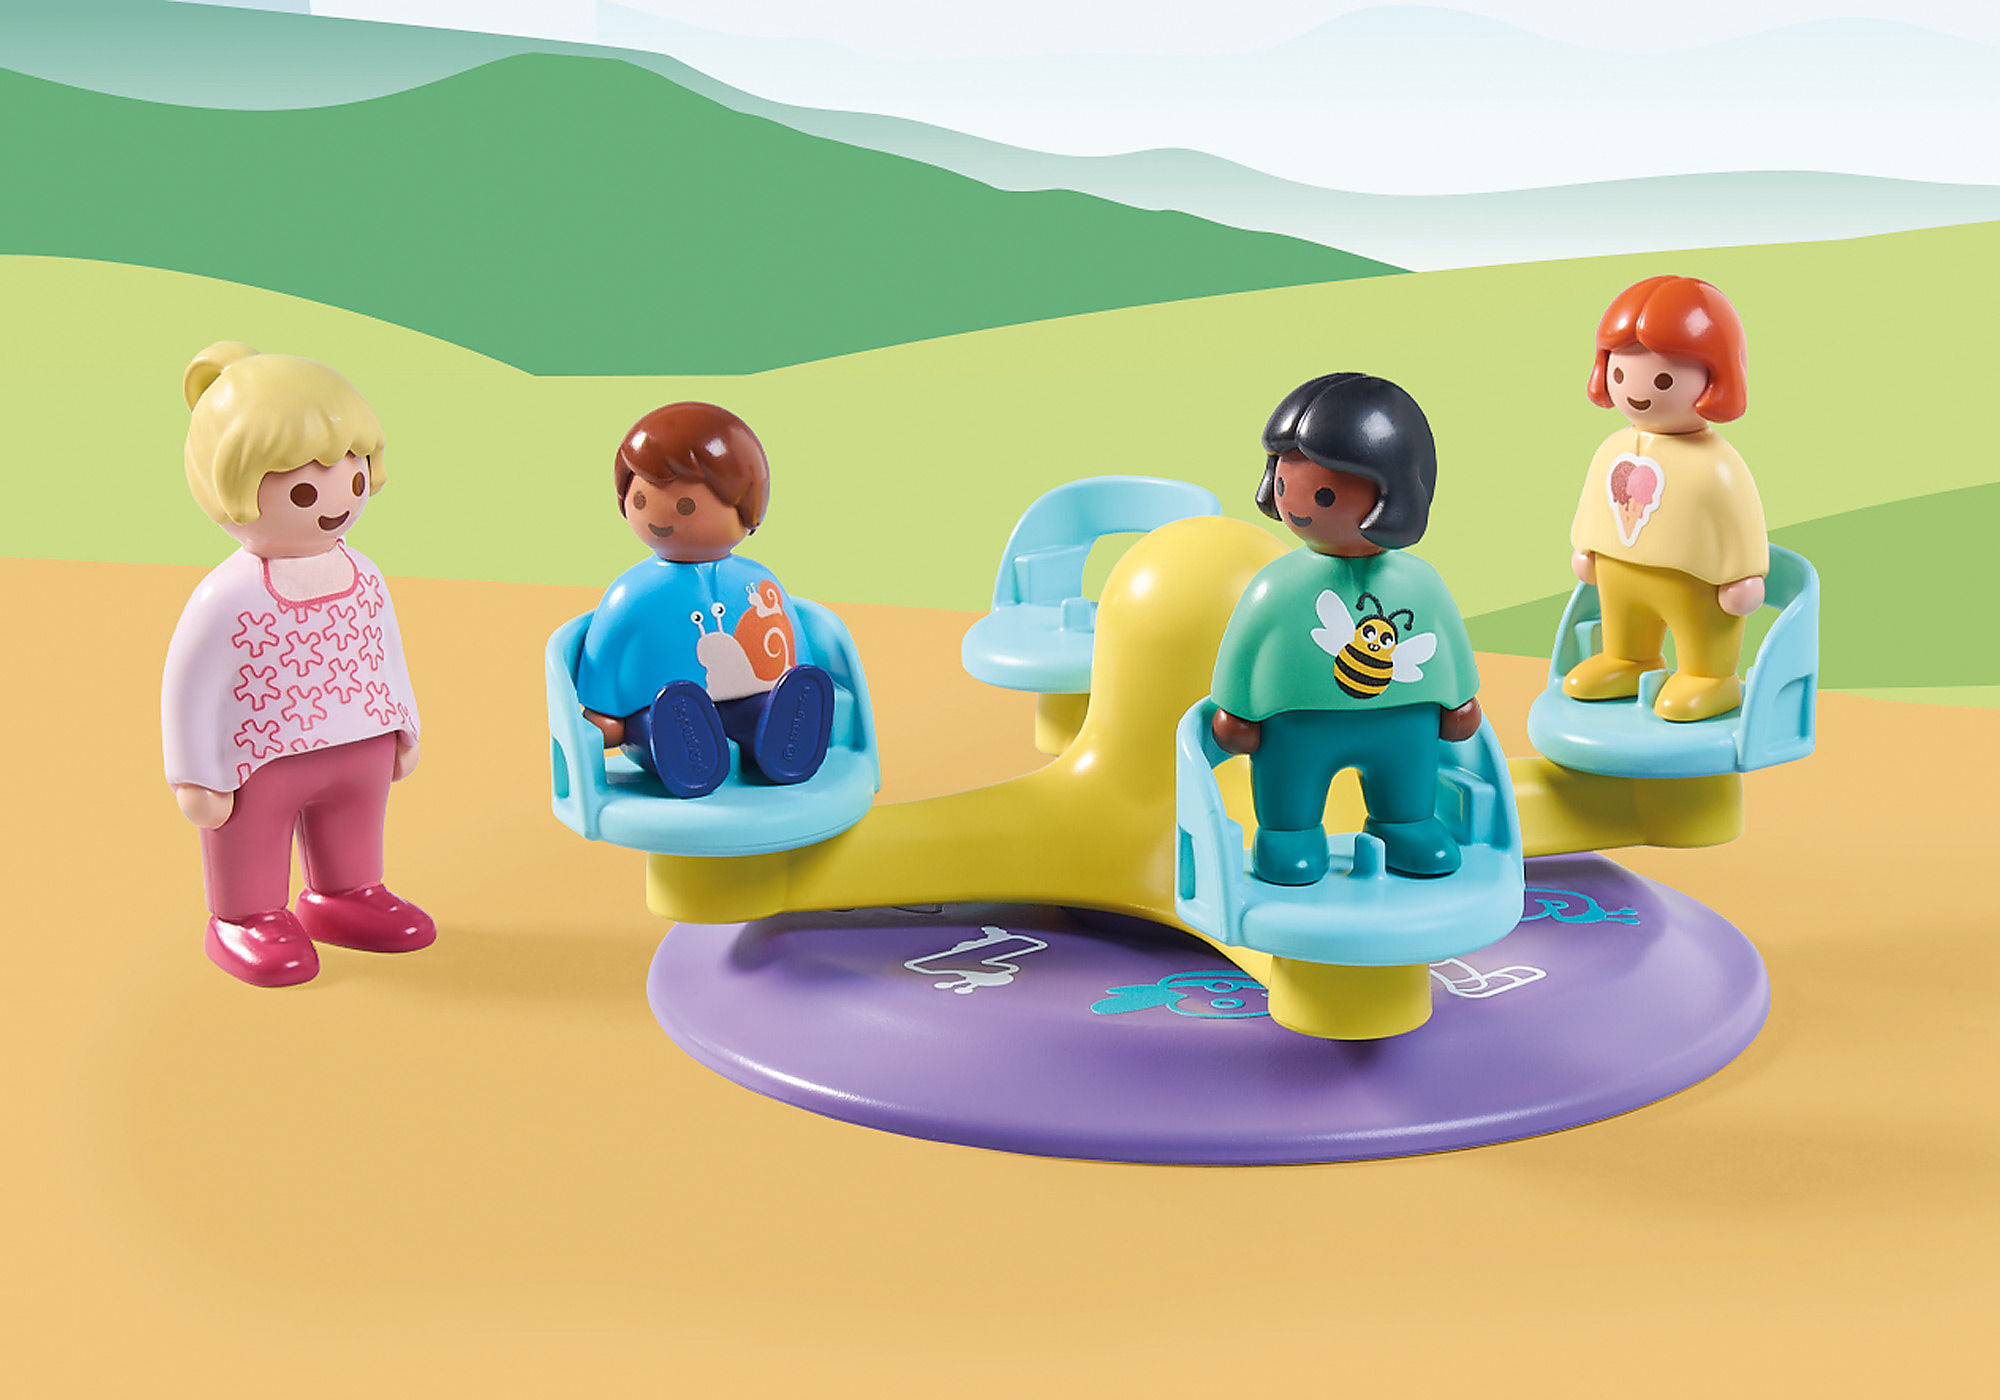 Playmobil for Toddlers & Preschoolers? Check out Playmobil 1.2.3!